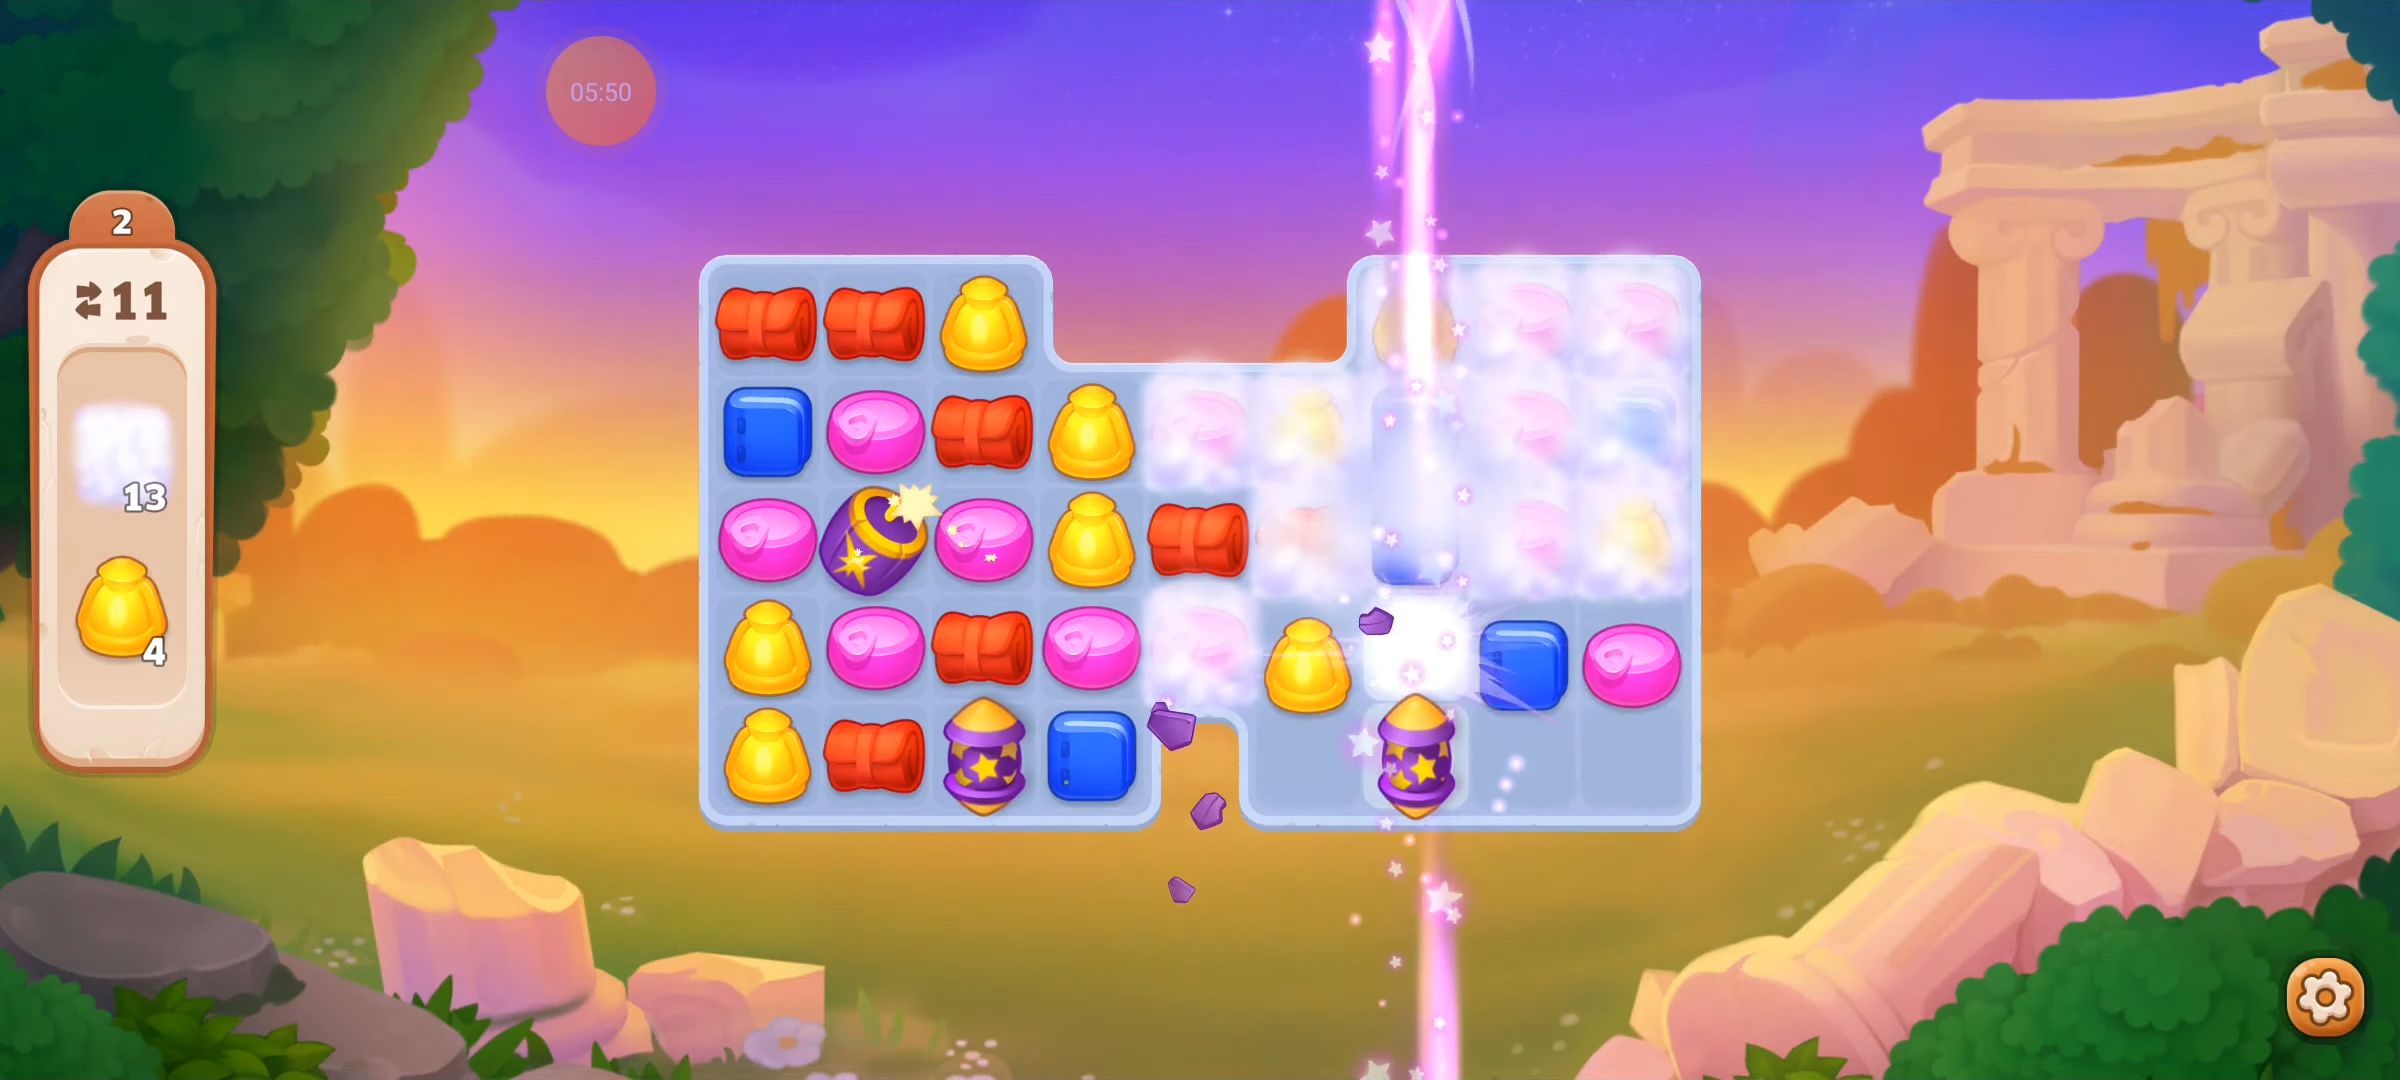 Full version of Android Match 3 game apk Puzzle Odyssey: adventure game for tablet and phone.